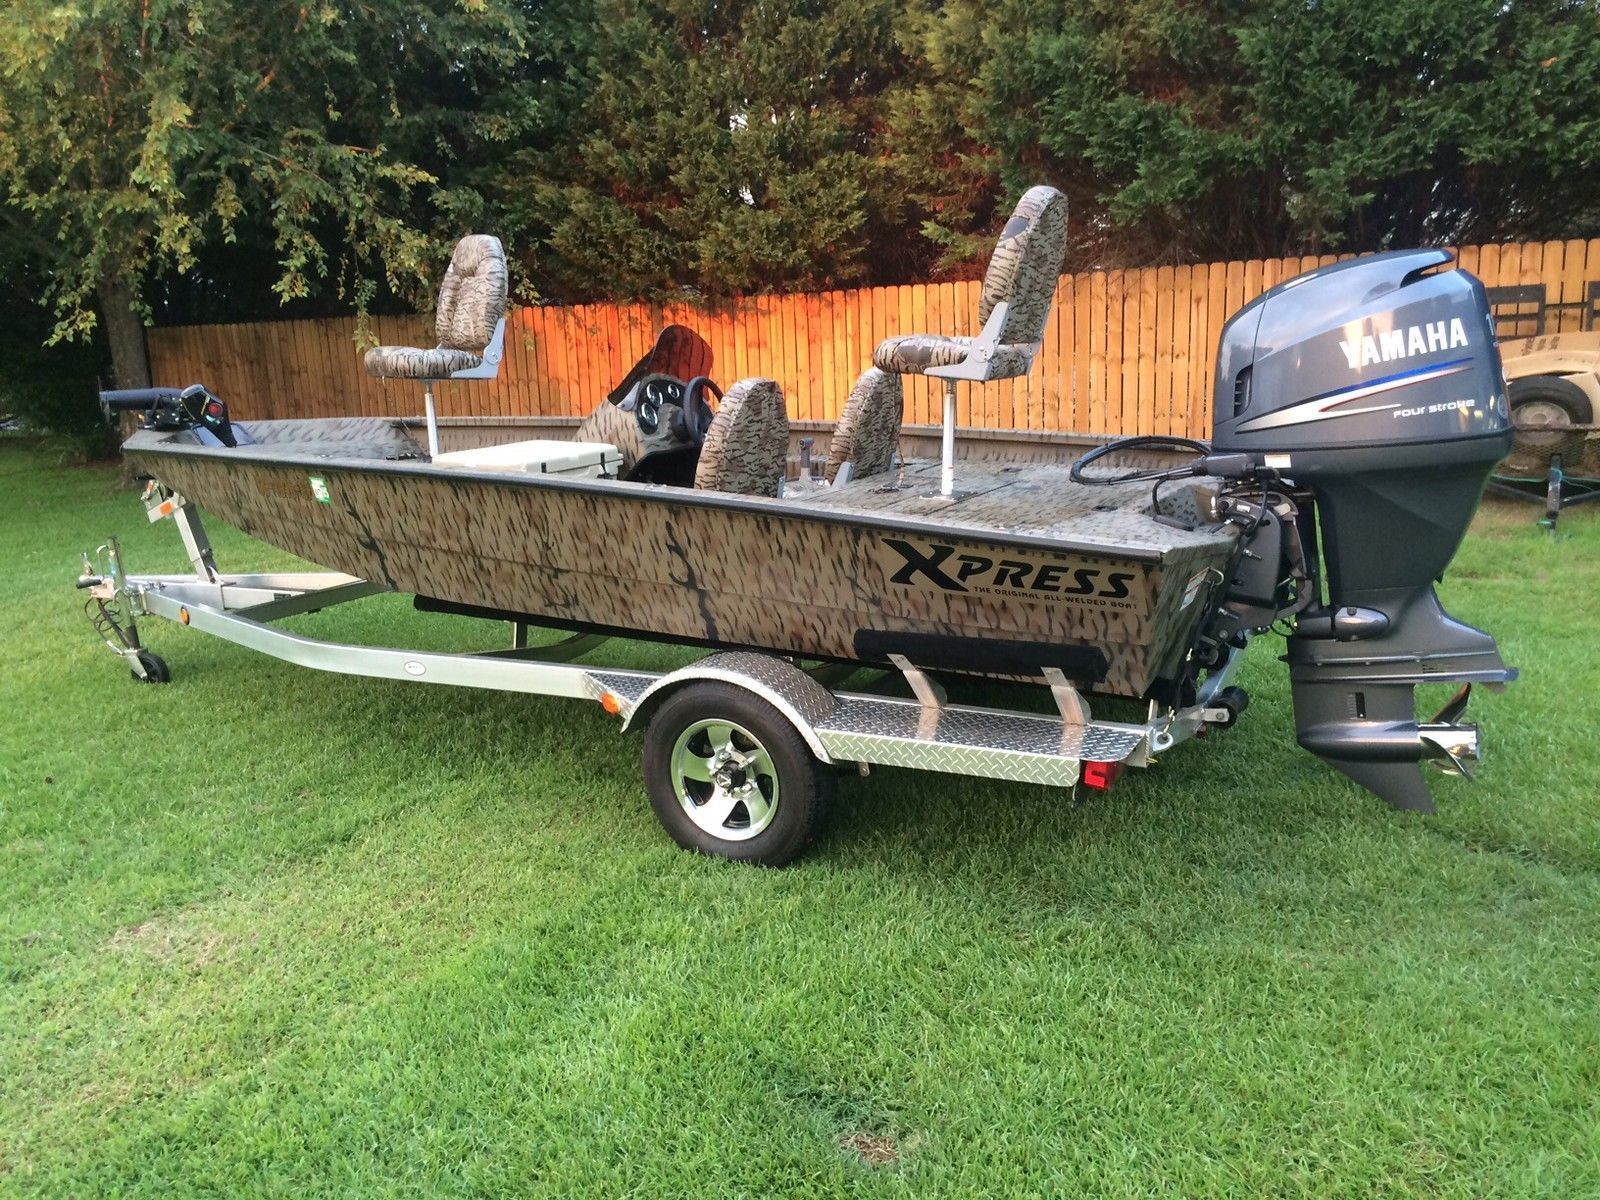 Xpress H17PFC 2012 for sale for $15,900 - Boats-from-USA.com